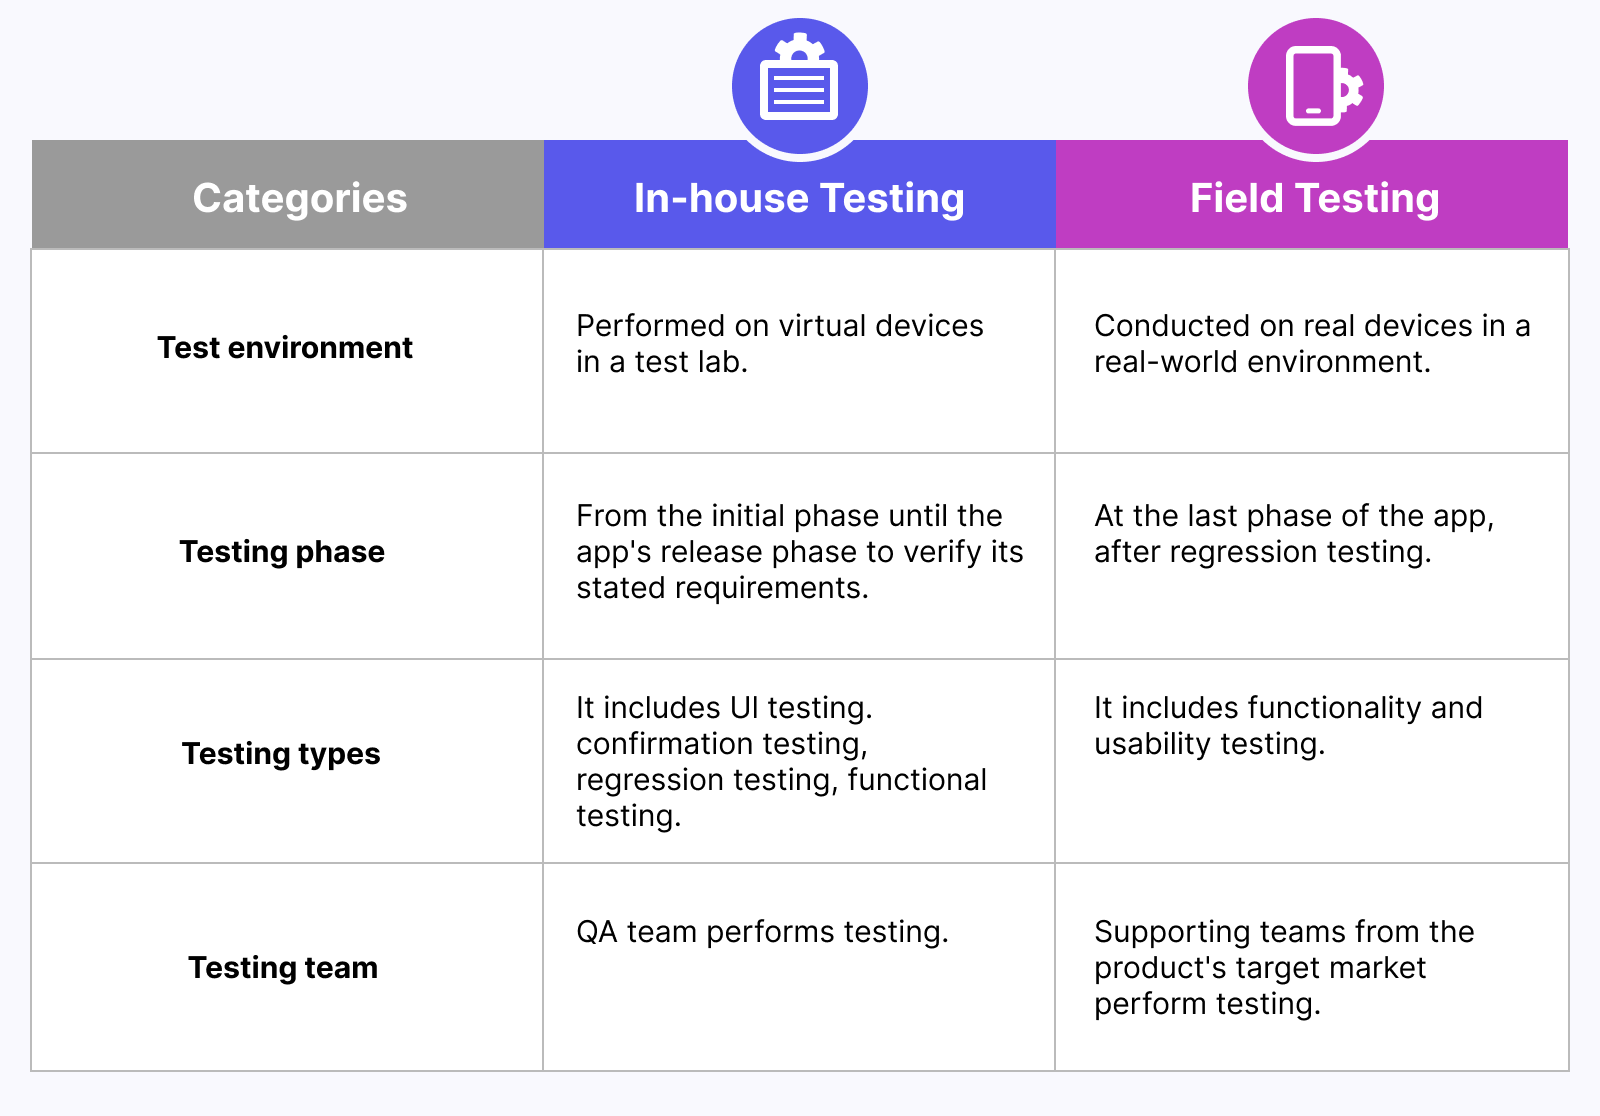 Difference between Field Testing and In-house Testing